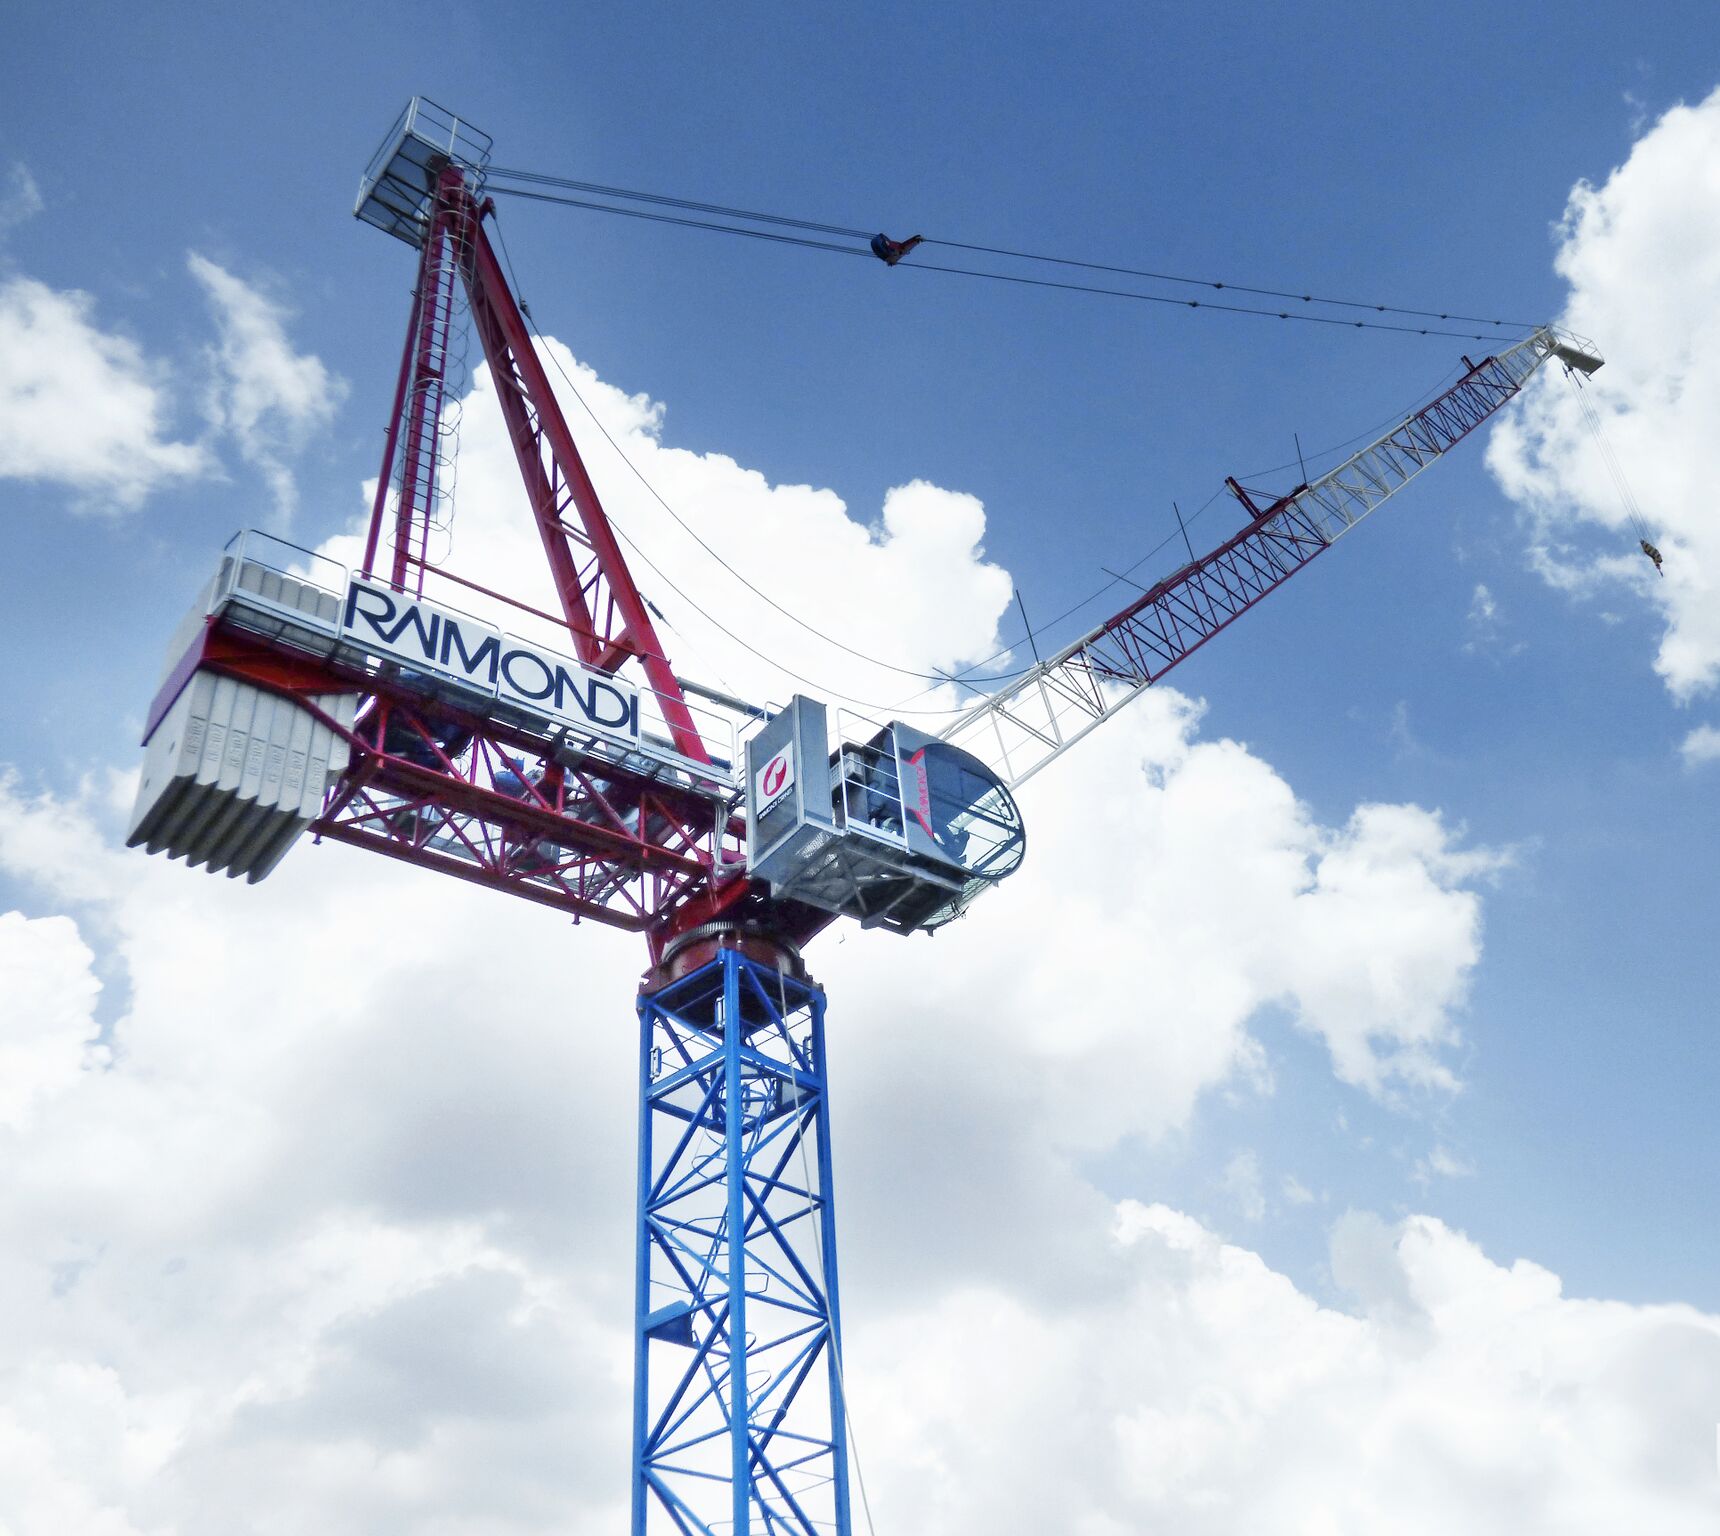 Raimondi Cranes delivers pre-orders of the newly launched LR213 luffing crane